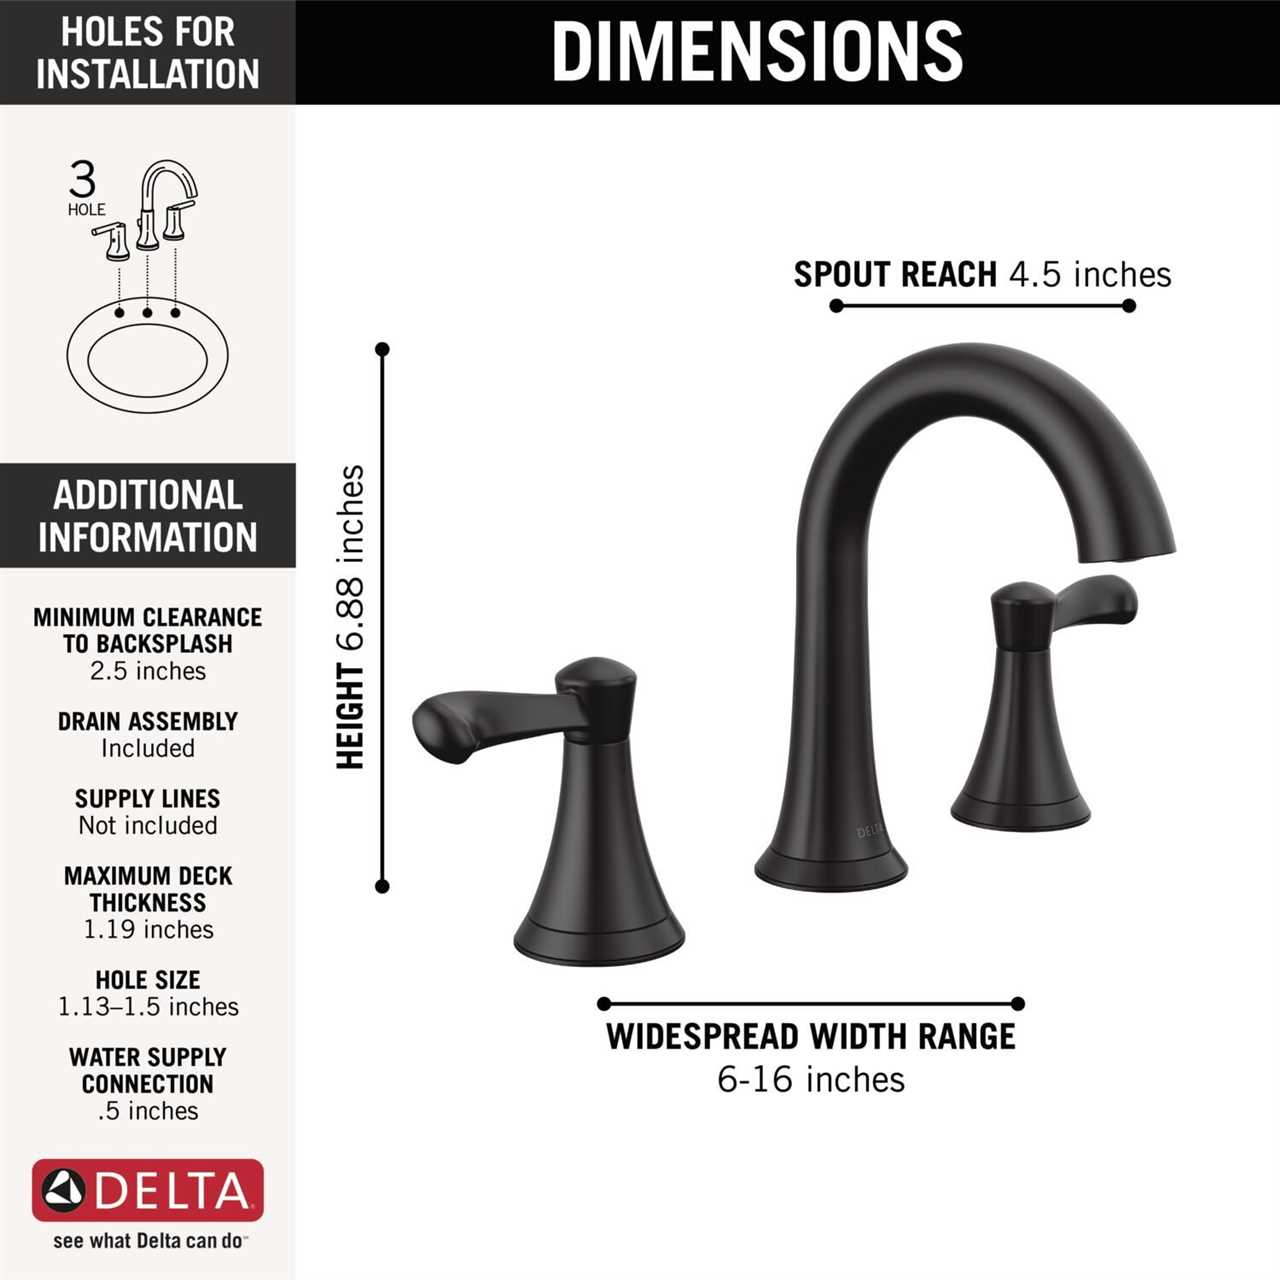 Delta Sink The Perfect Addition to Your Bathroom